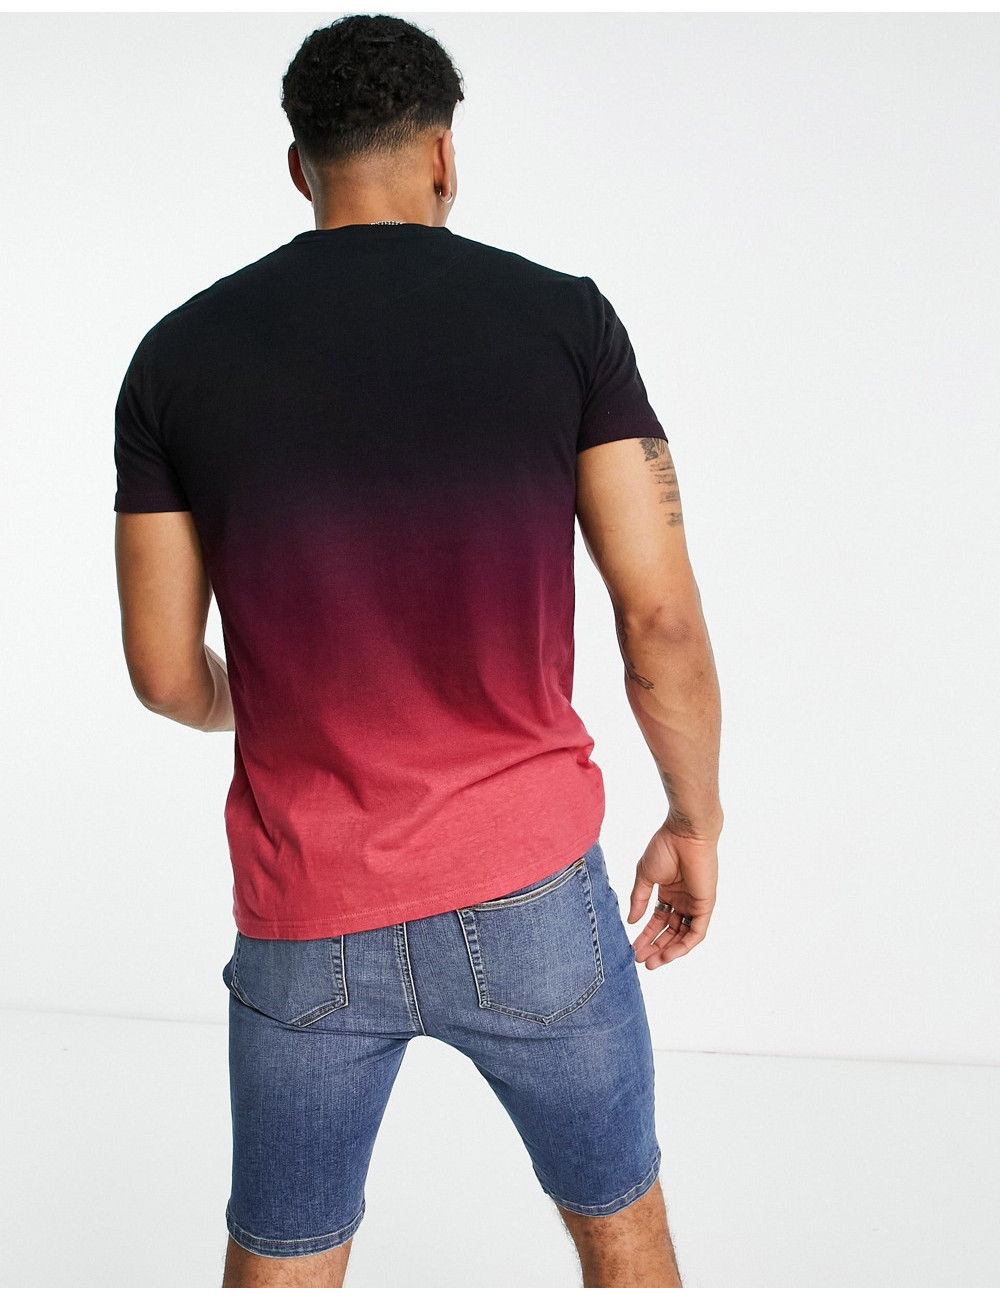 Hollister perspective ombre...